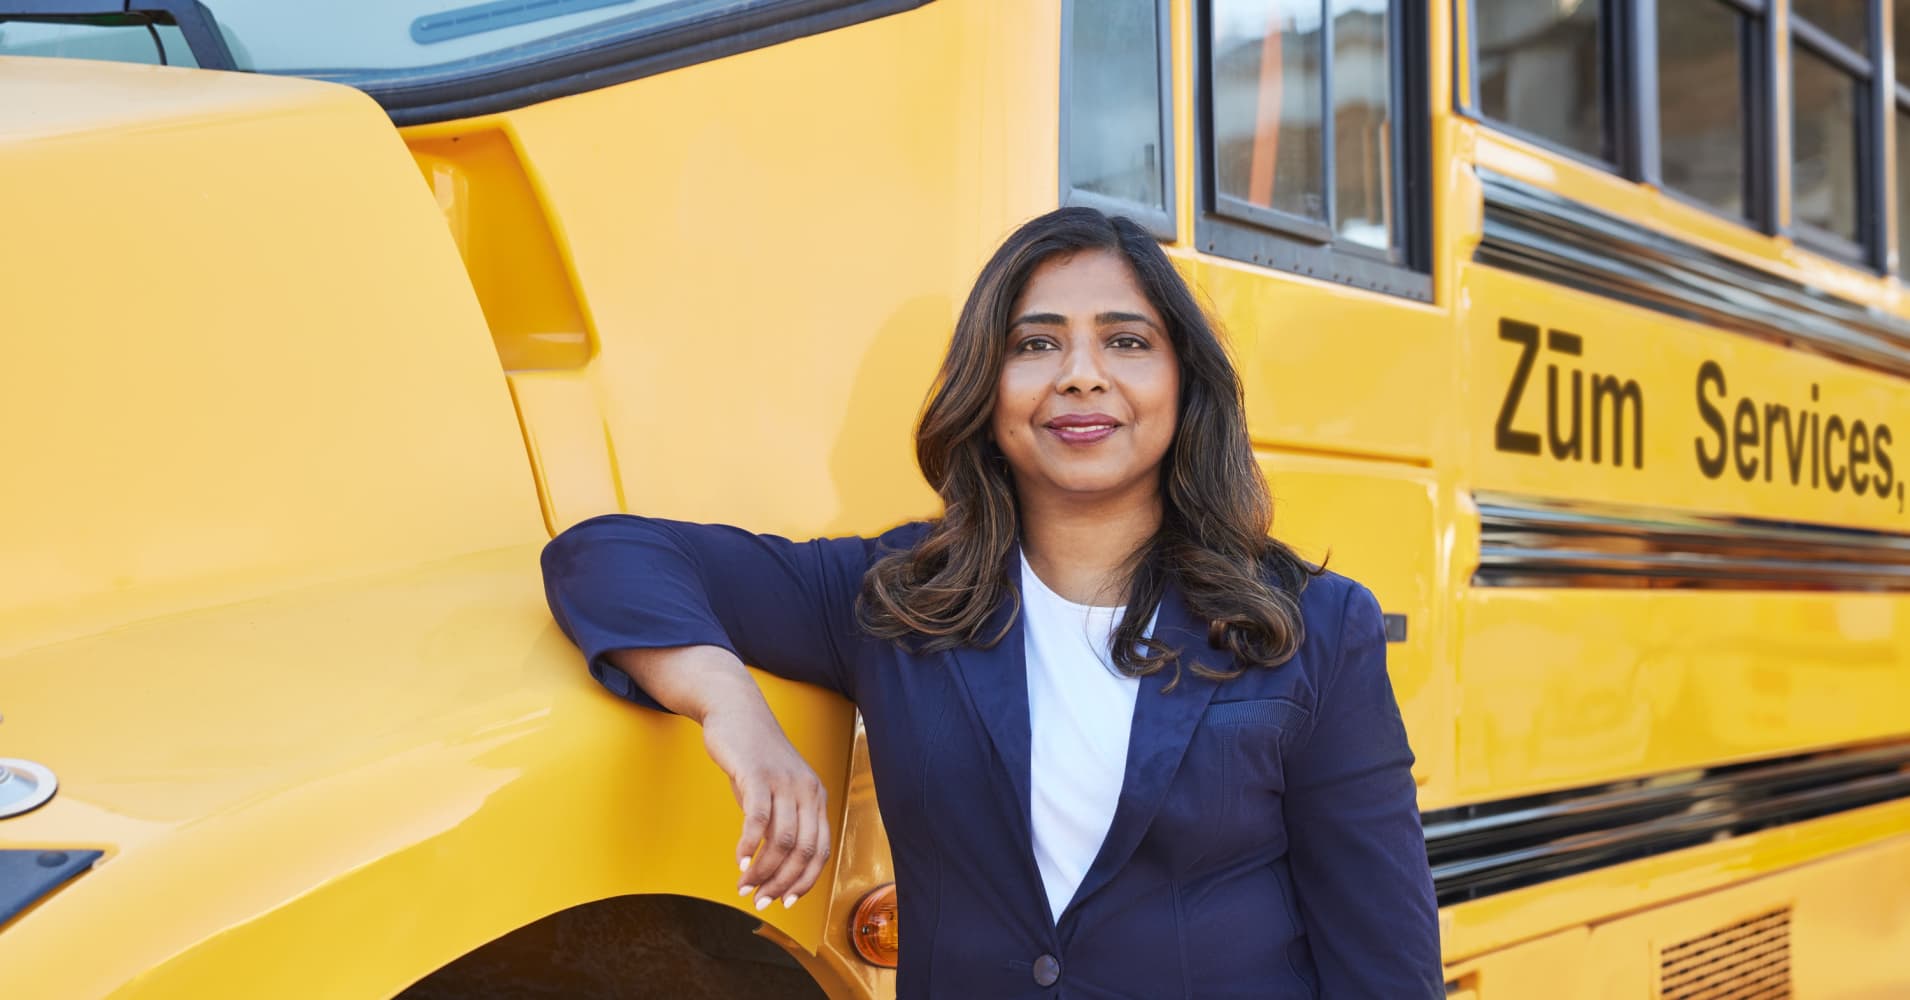 a working mother built a $1.3 billion startup inspired by unreliable school buses: it was ‘an aha moment’